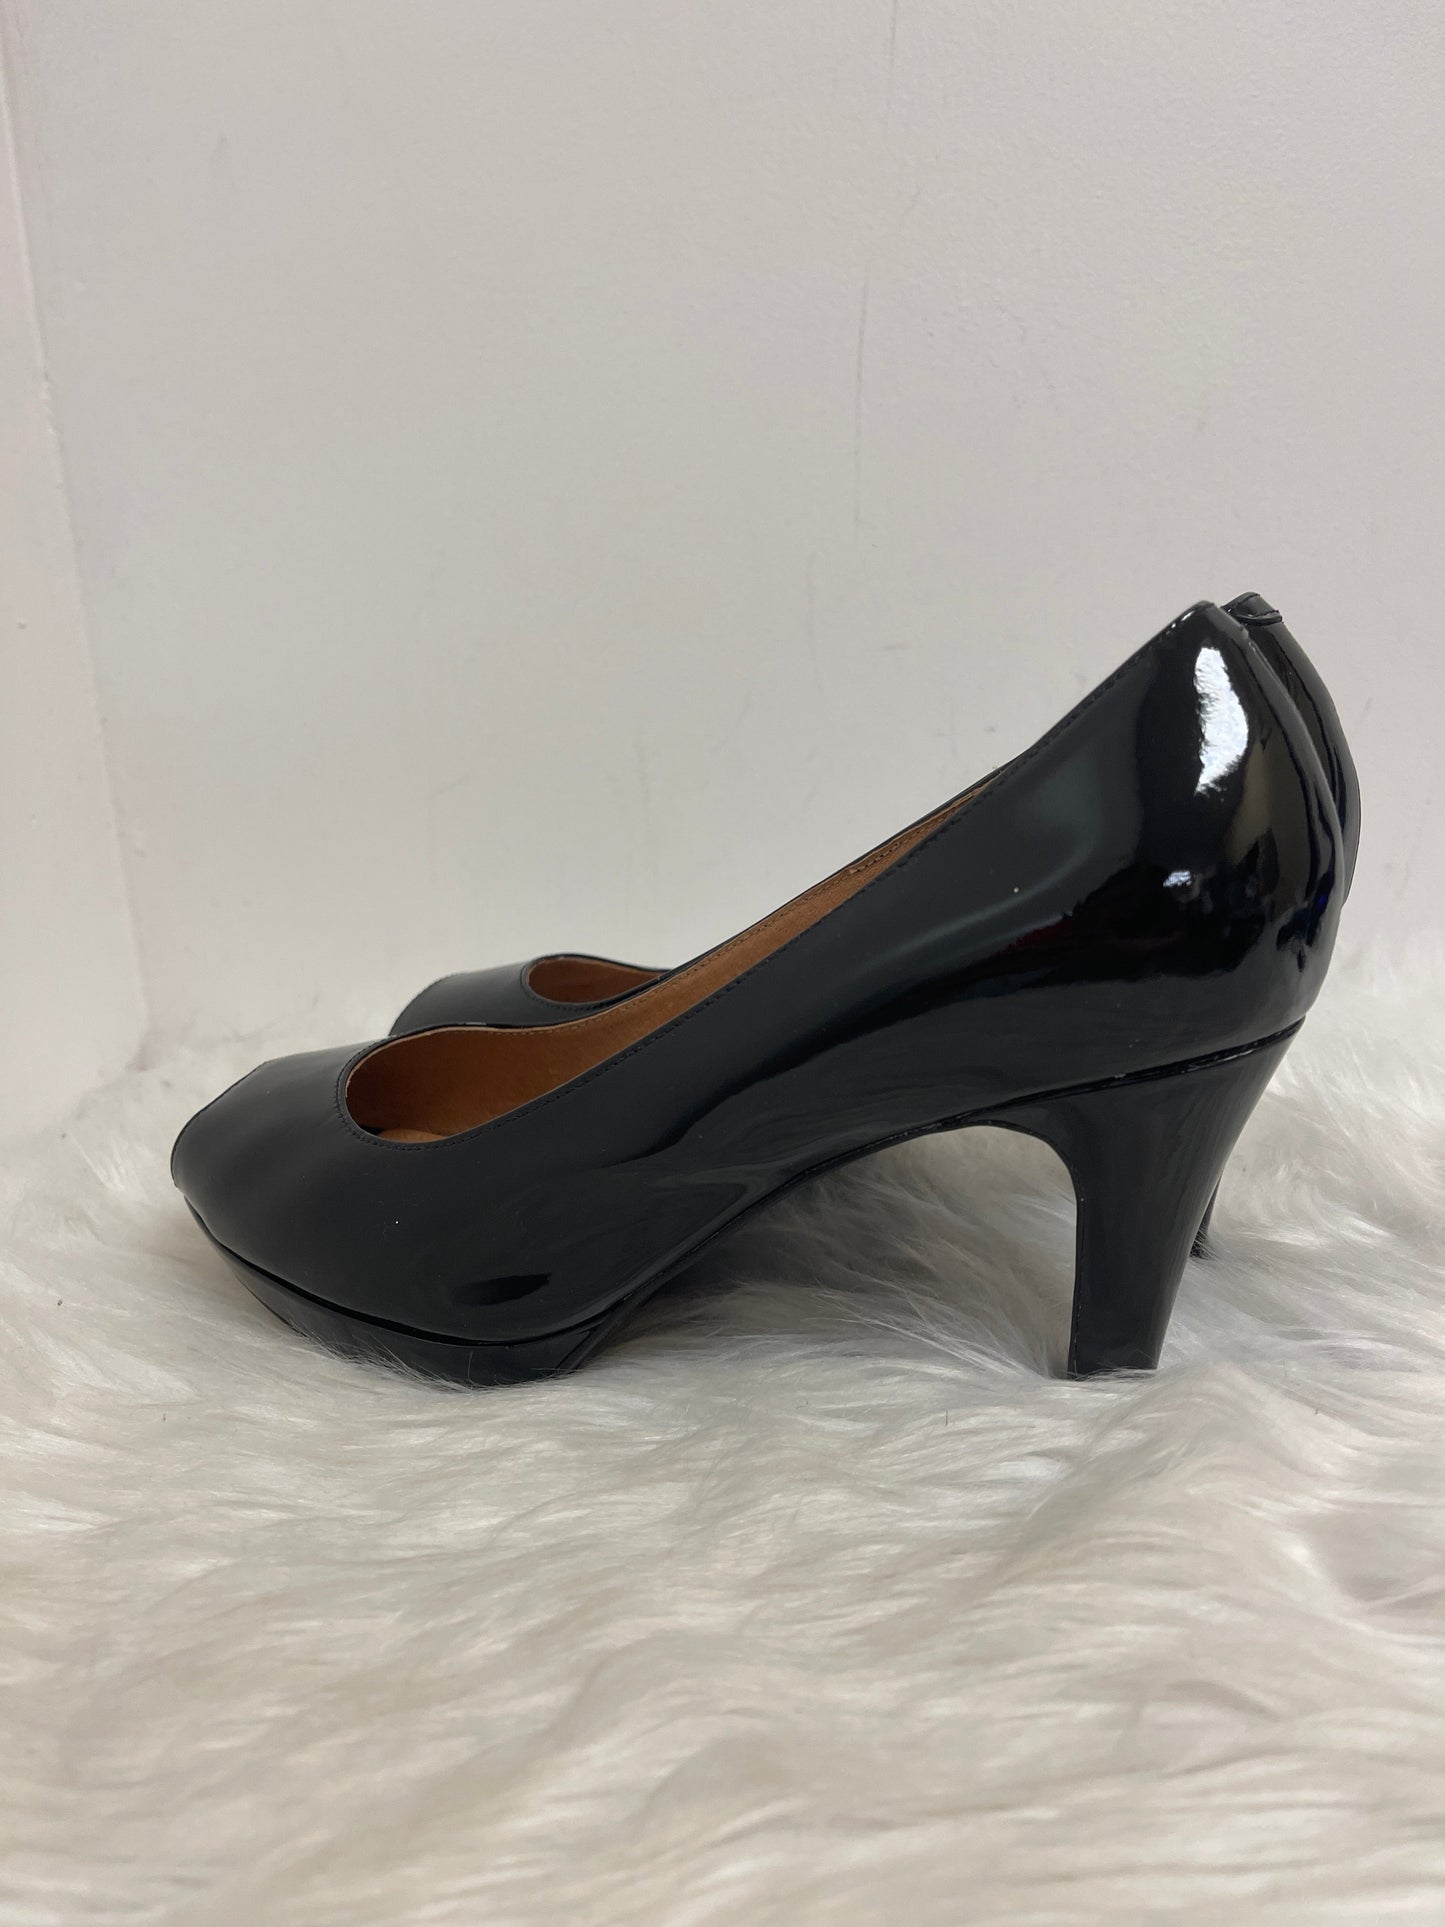 Shoes Heels Platform By Clarks  Size: 9